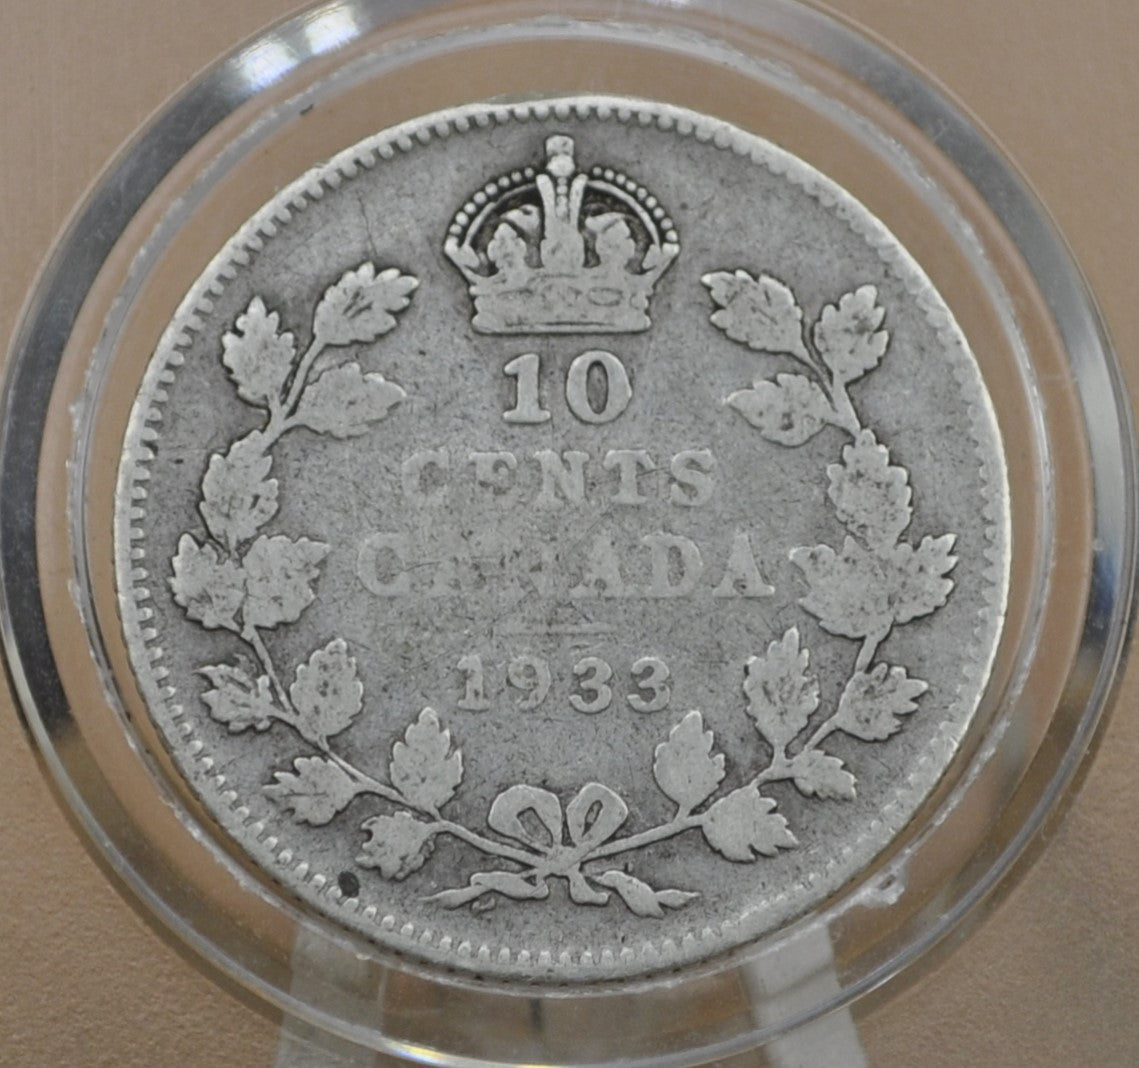 1933 Canadian Silver 10 Cent Coin - F (Fine) Condition - King George - Canada 10 Cent 80% Silver 1933 - Rarer Date, Low Mintage